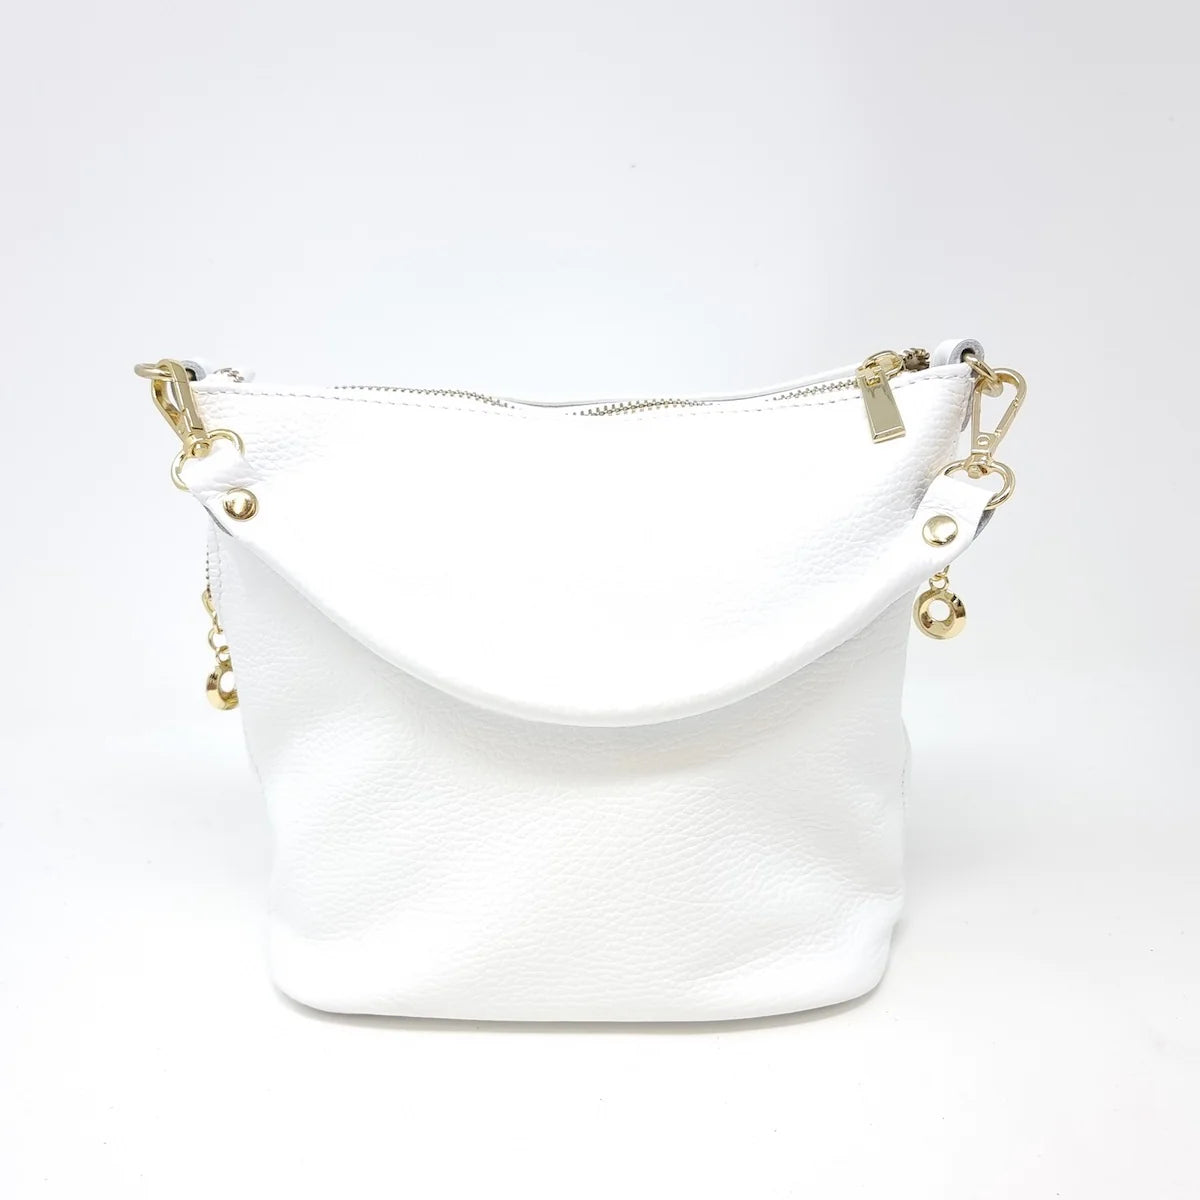 Leather Zipper Bag in White